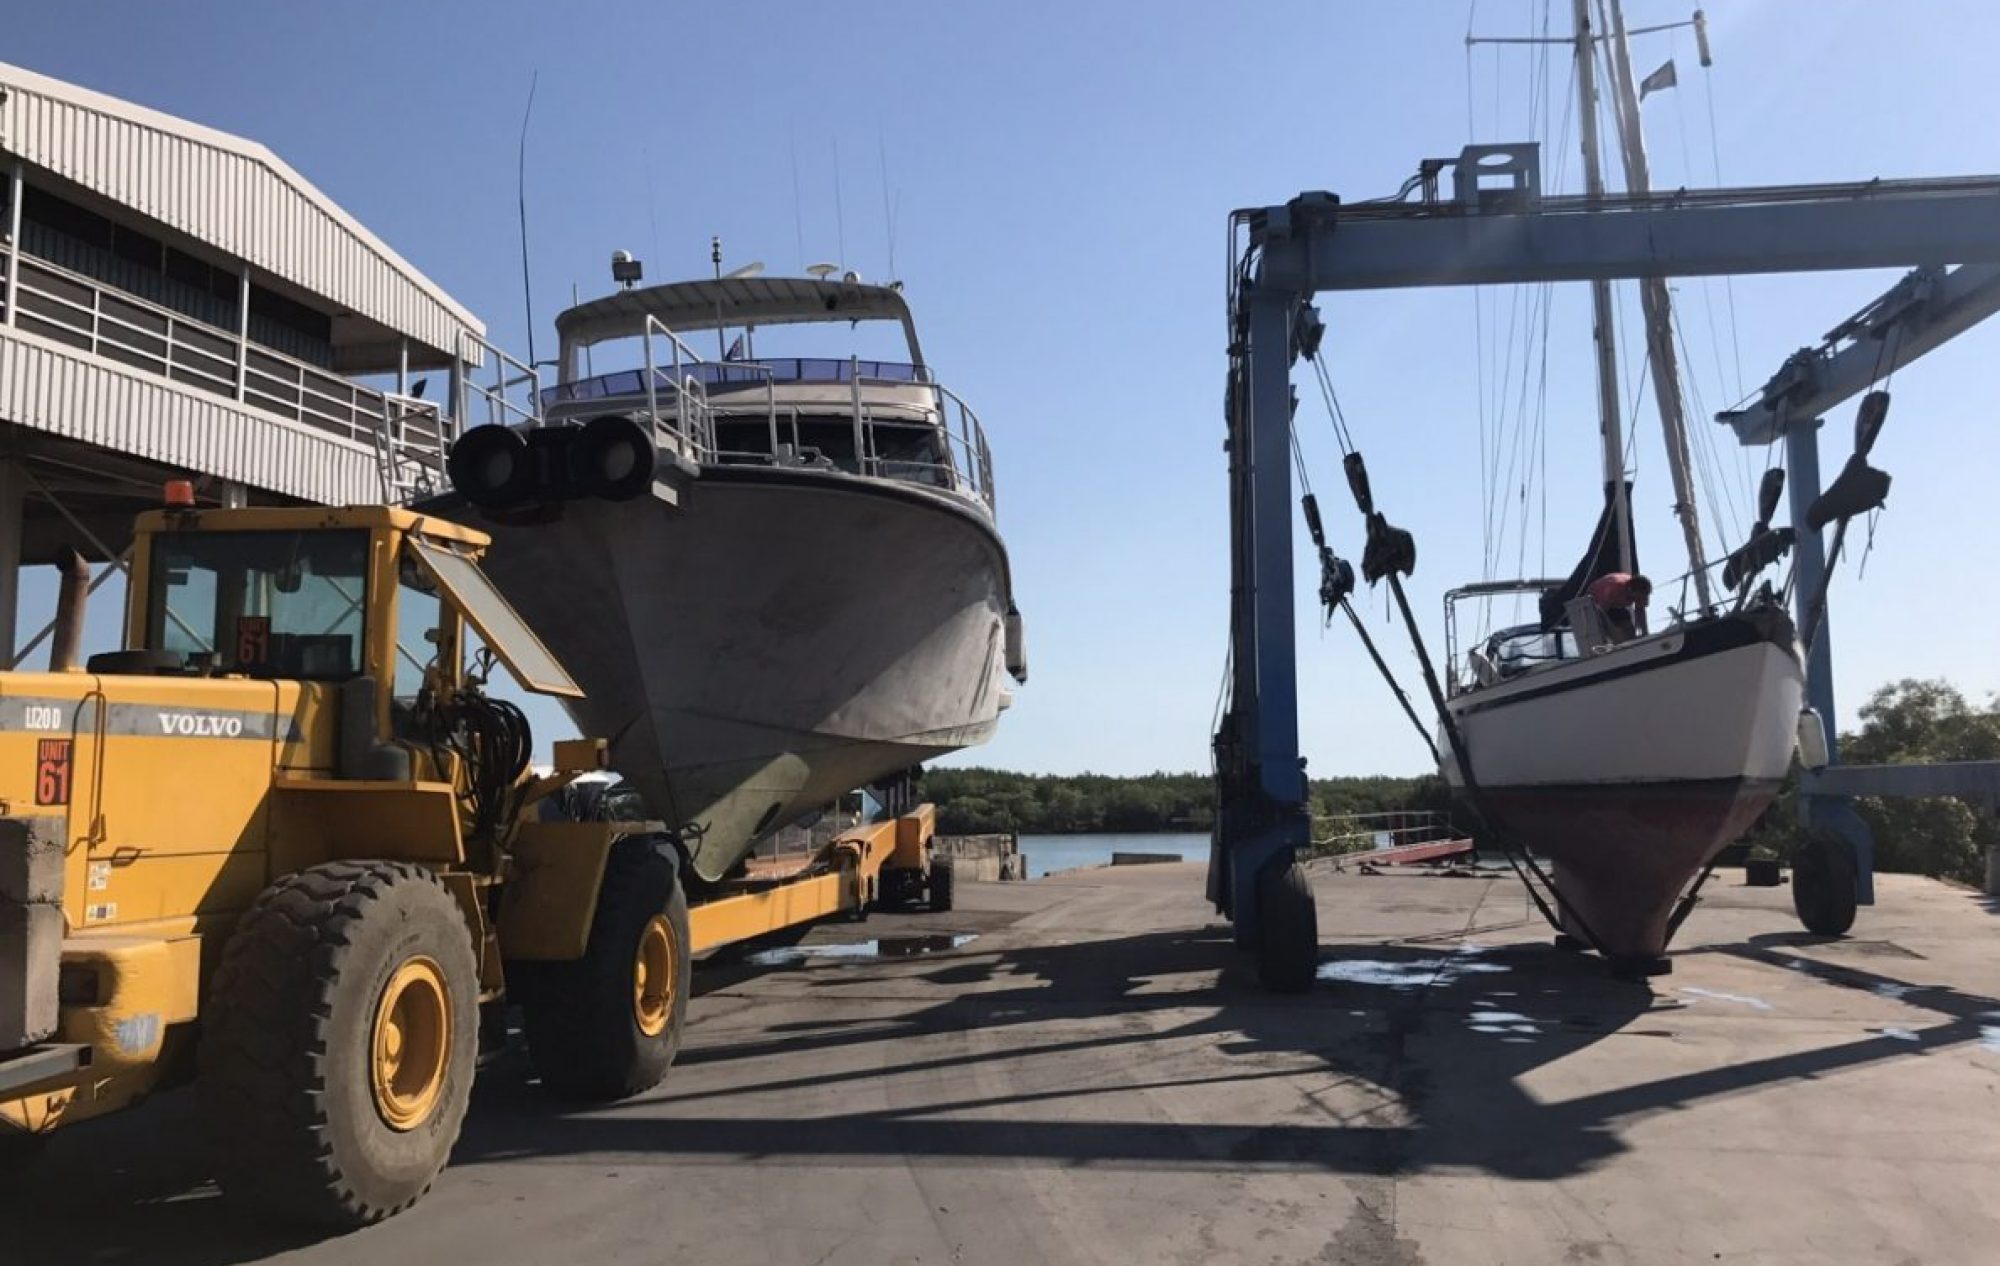 Boat lifting and hard stand storage